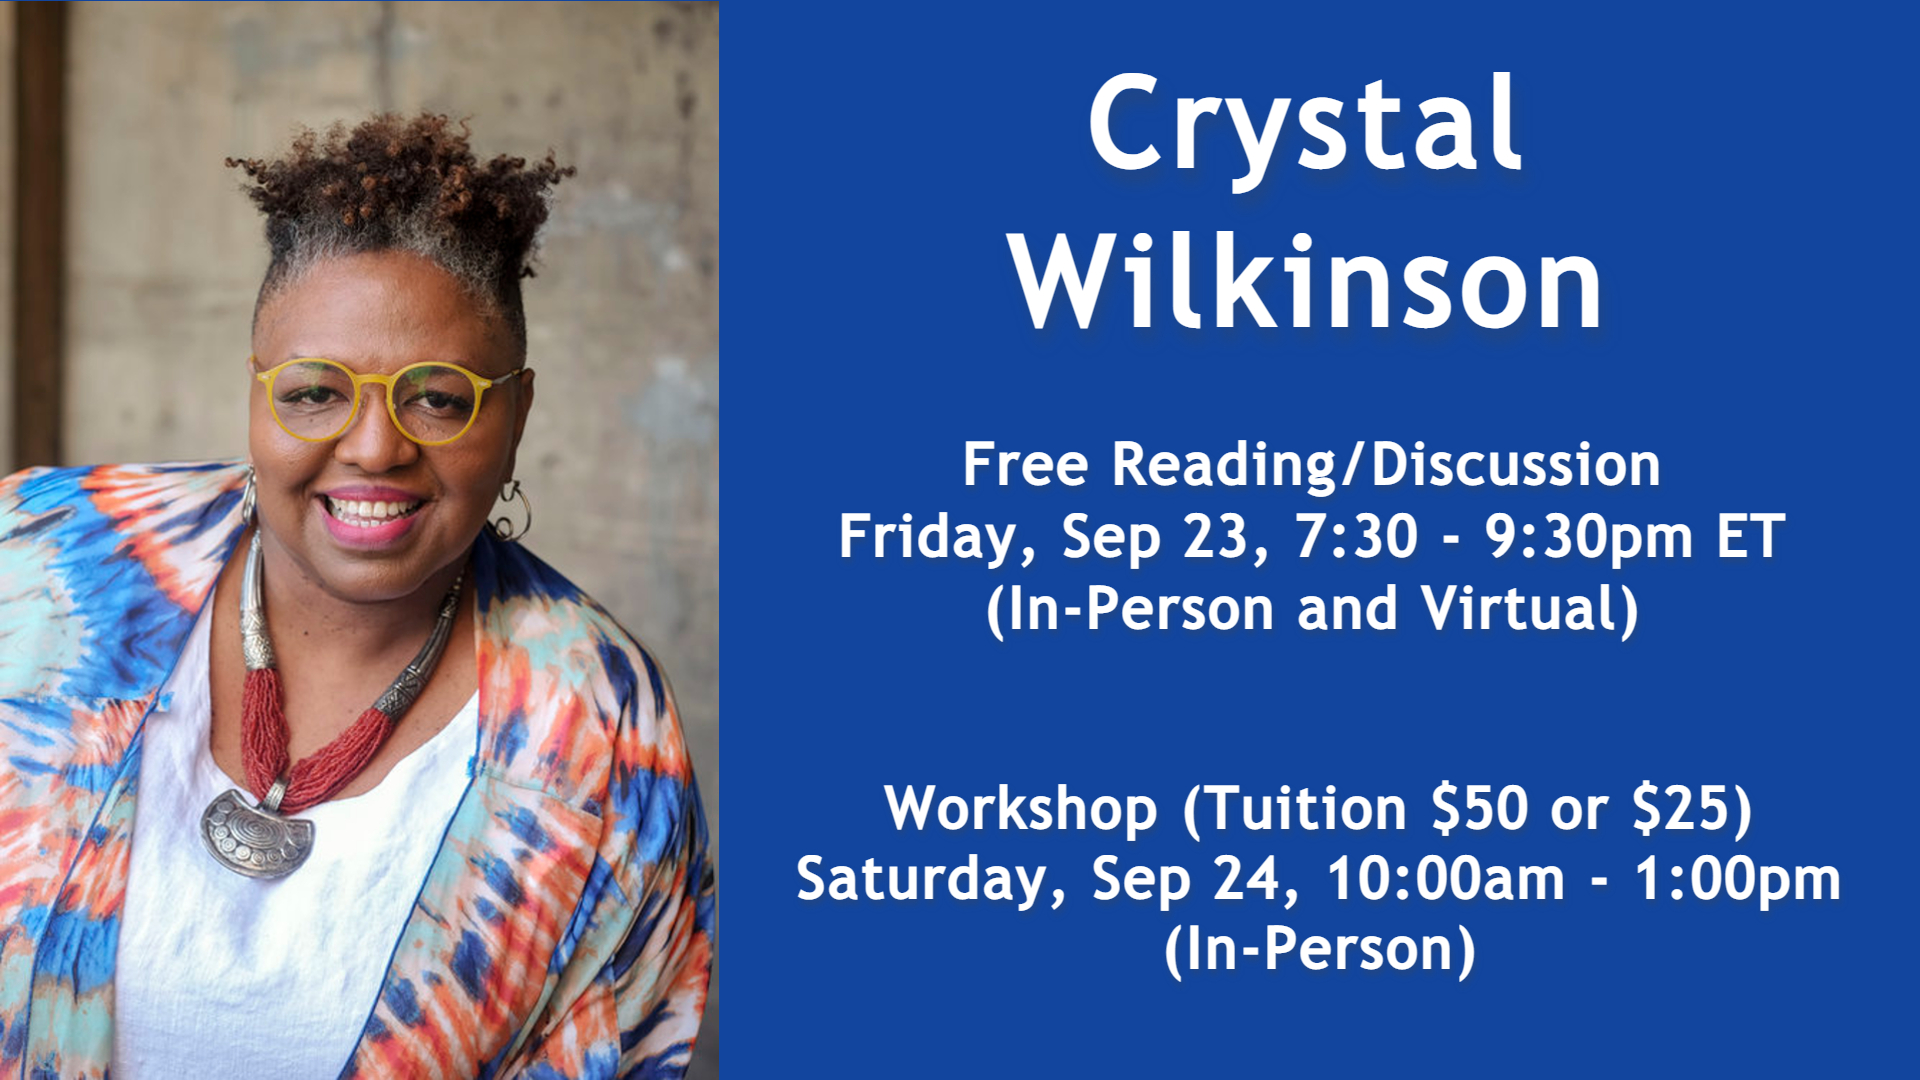 Crystal Wilkinson Event Image